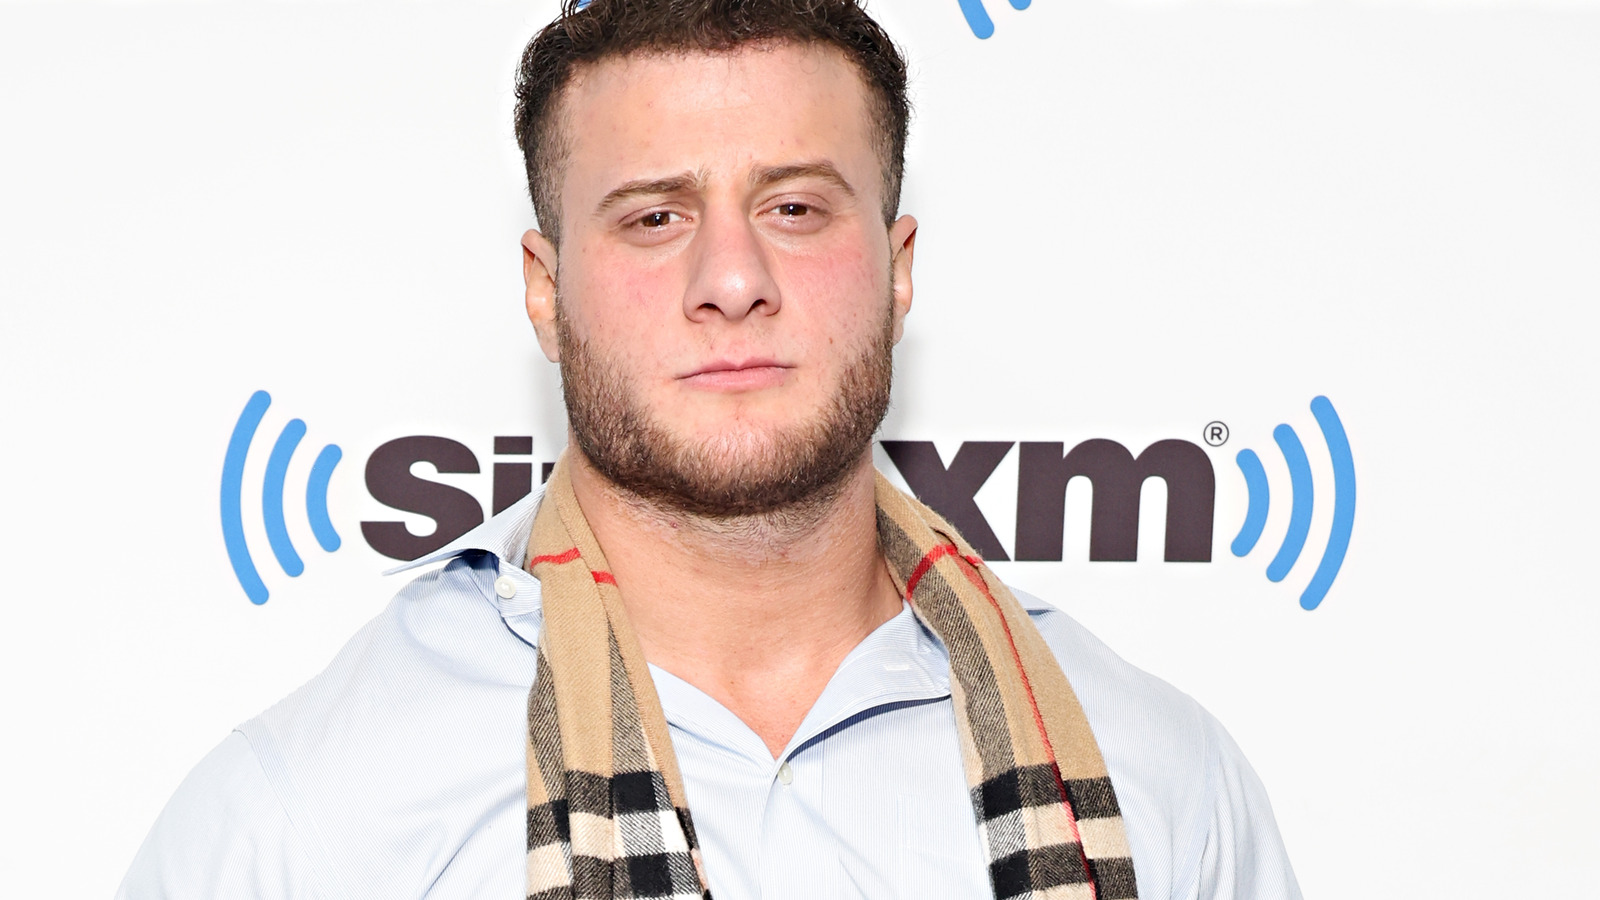 Backstage Update On MJF's Status, Whether To Expect Him At AEW Dynamite: Homecoming